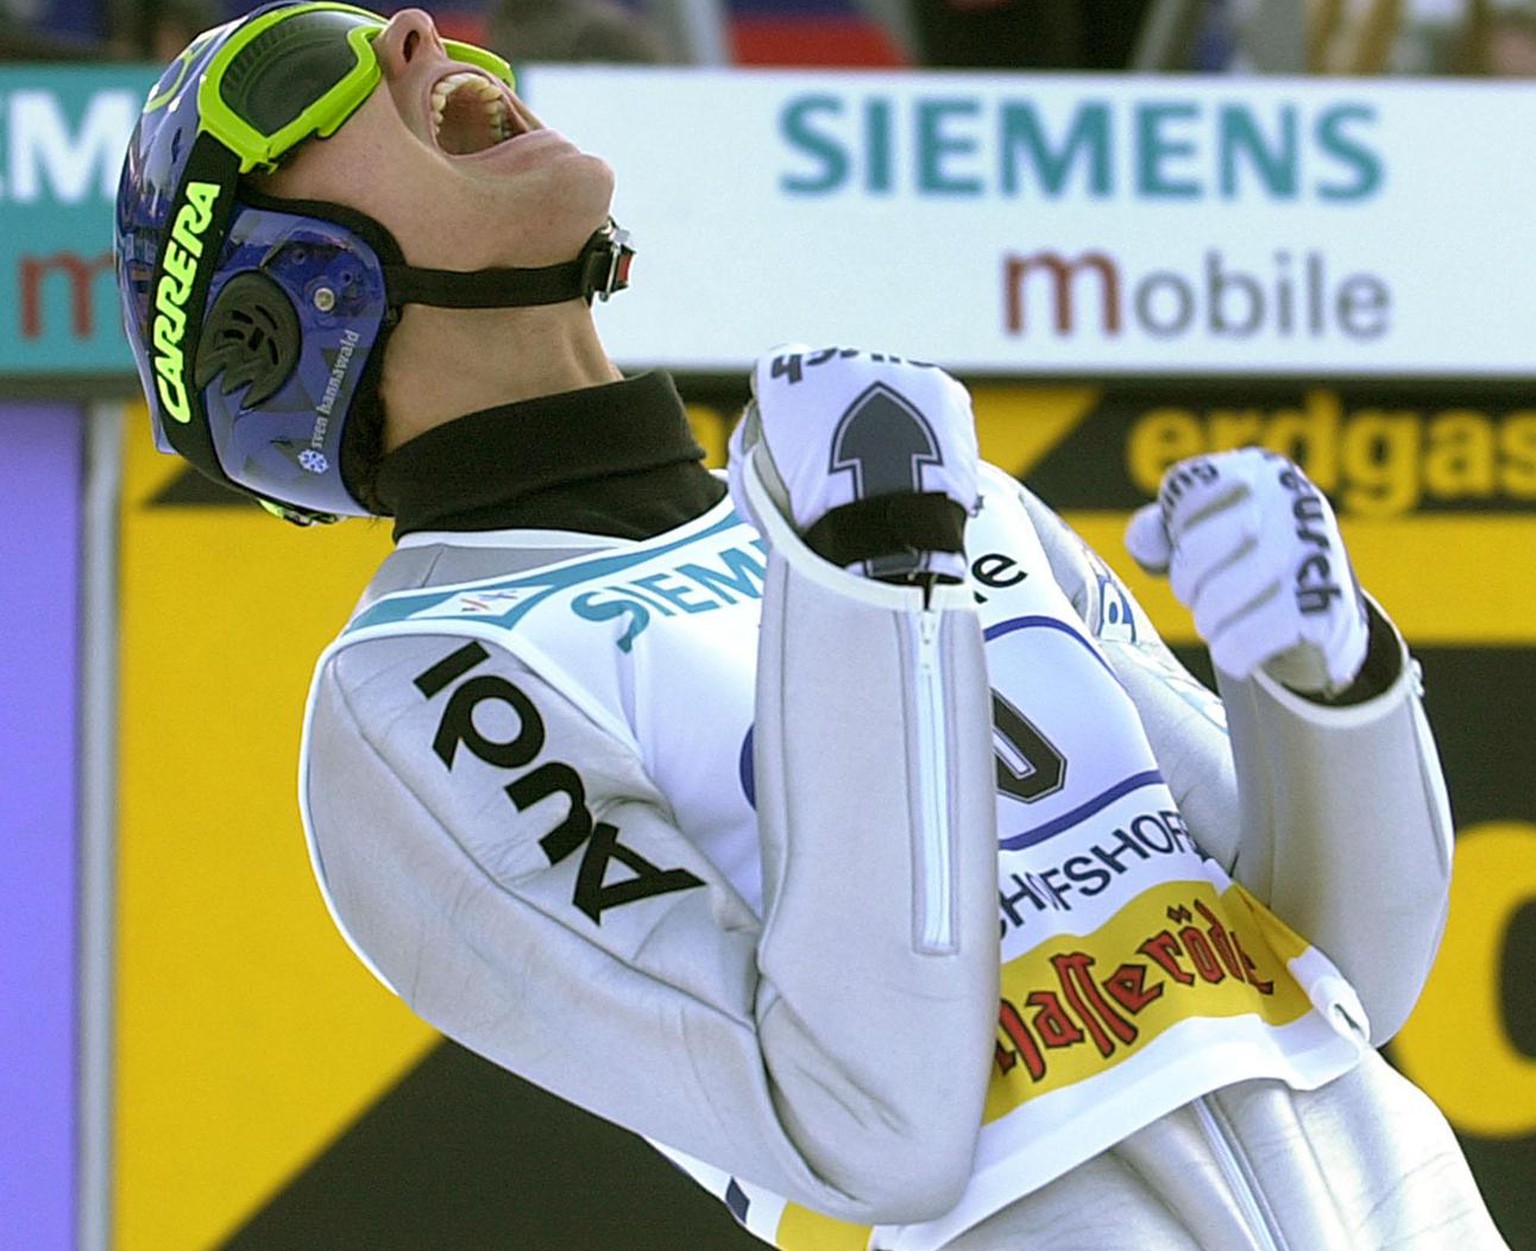 BIS04 - 20020106 - BISCHOFSHOFEN, AUSTRIA : German Sven Hannawald jubilates after his first jump at the Bischofshofen ski jumping competition, the fourth and last stage of the Four Hills Tournament, i ...